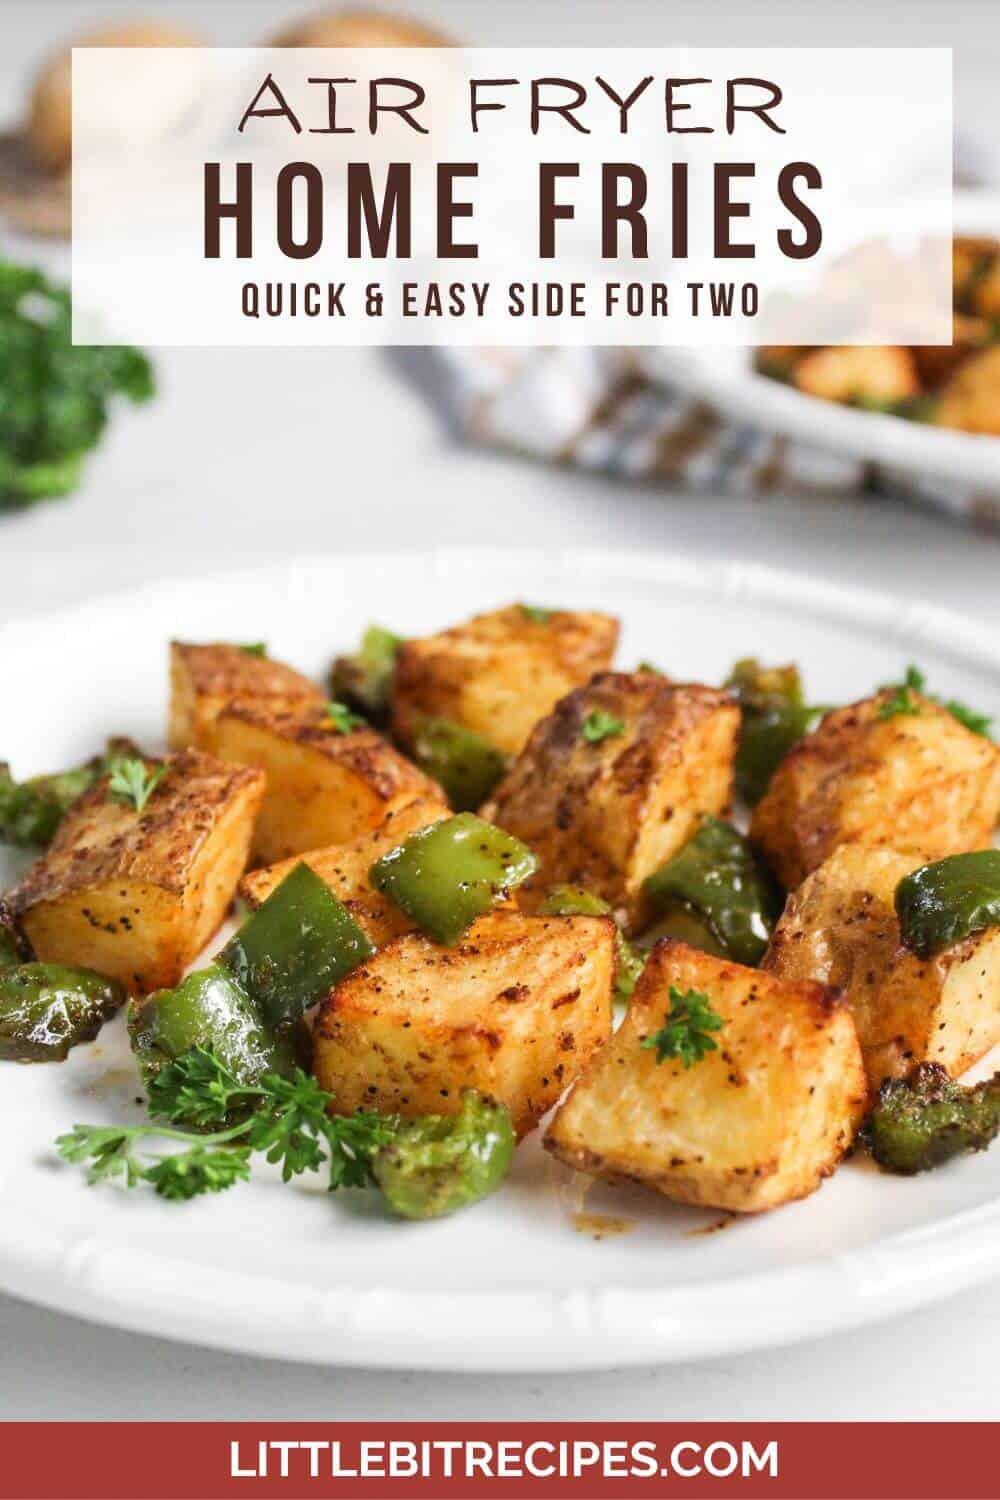 Air fryer home fries with text.